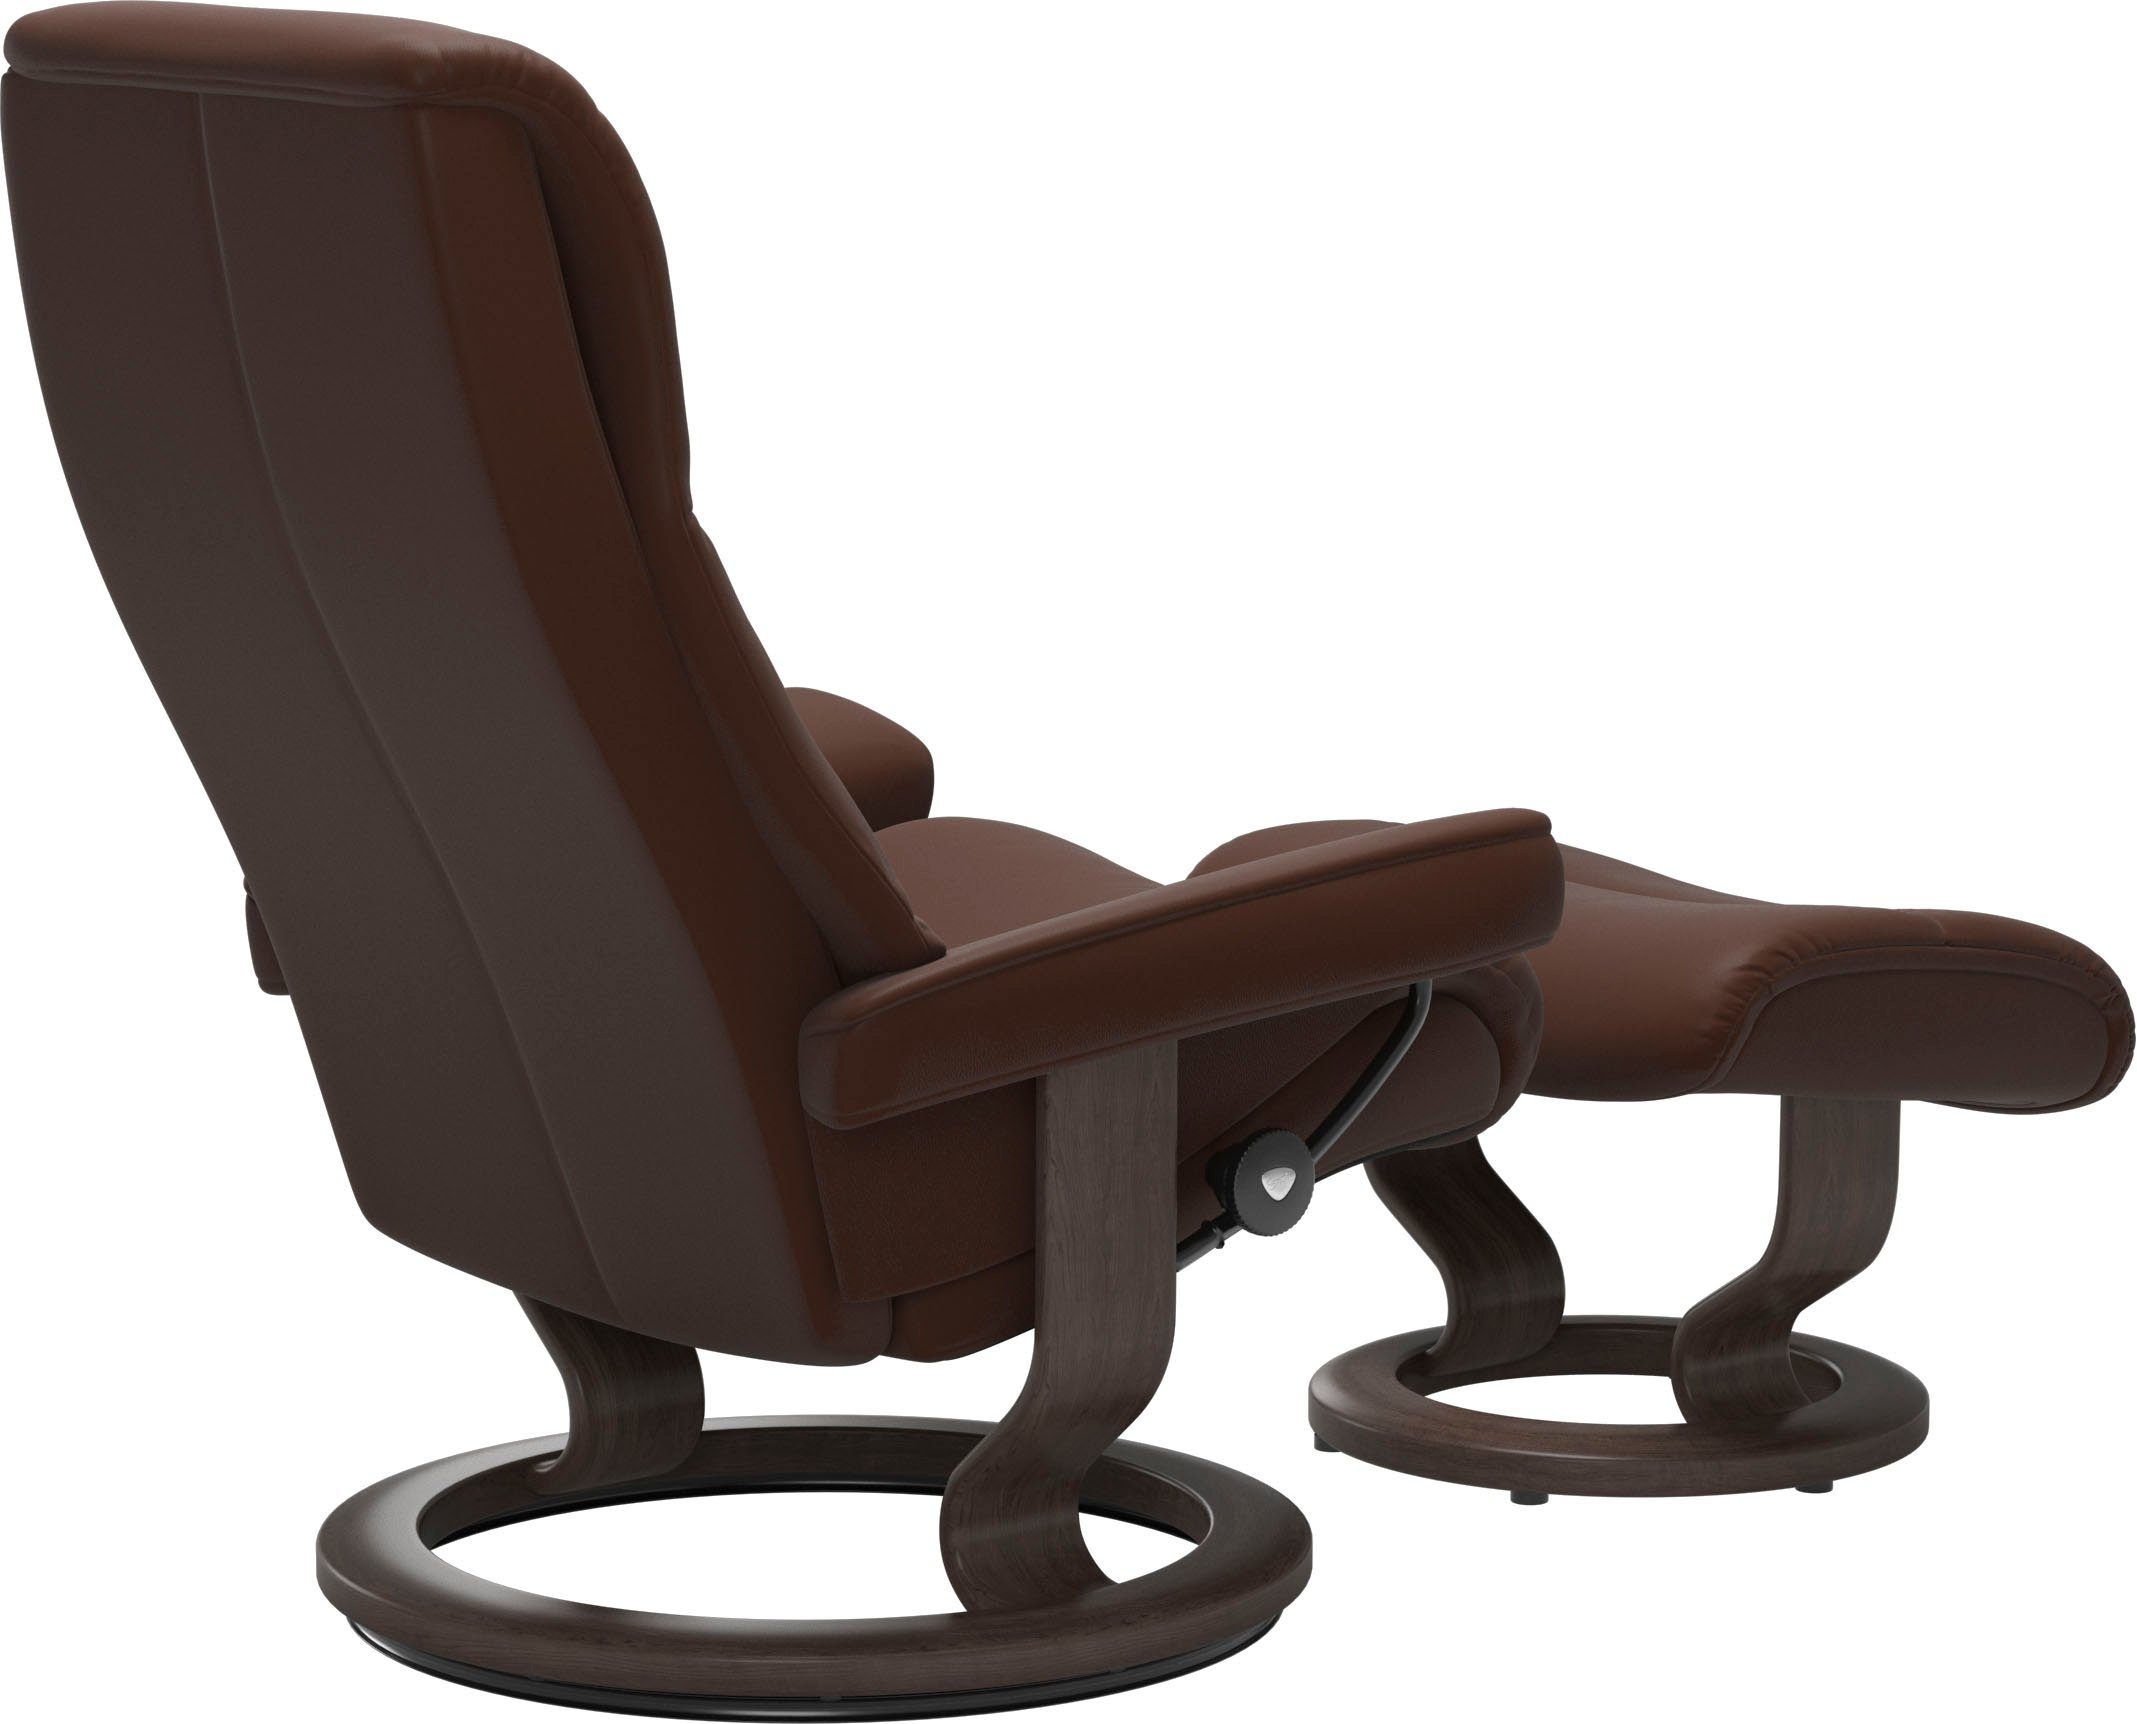 Stressless® Base, L,Gestell Größe Classic Relaxsessel Wenge mit View,